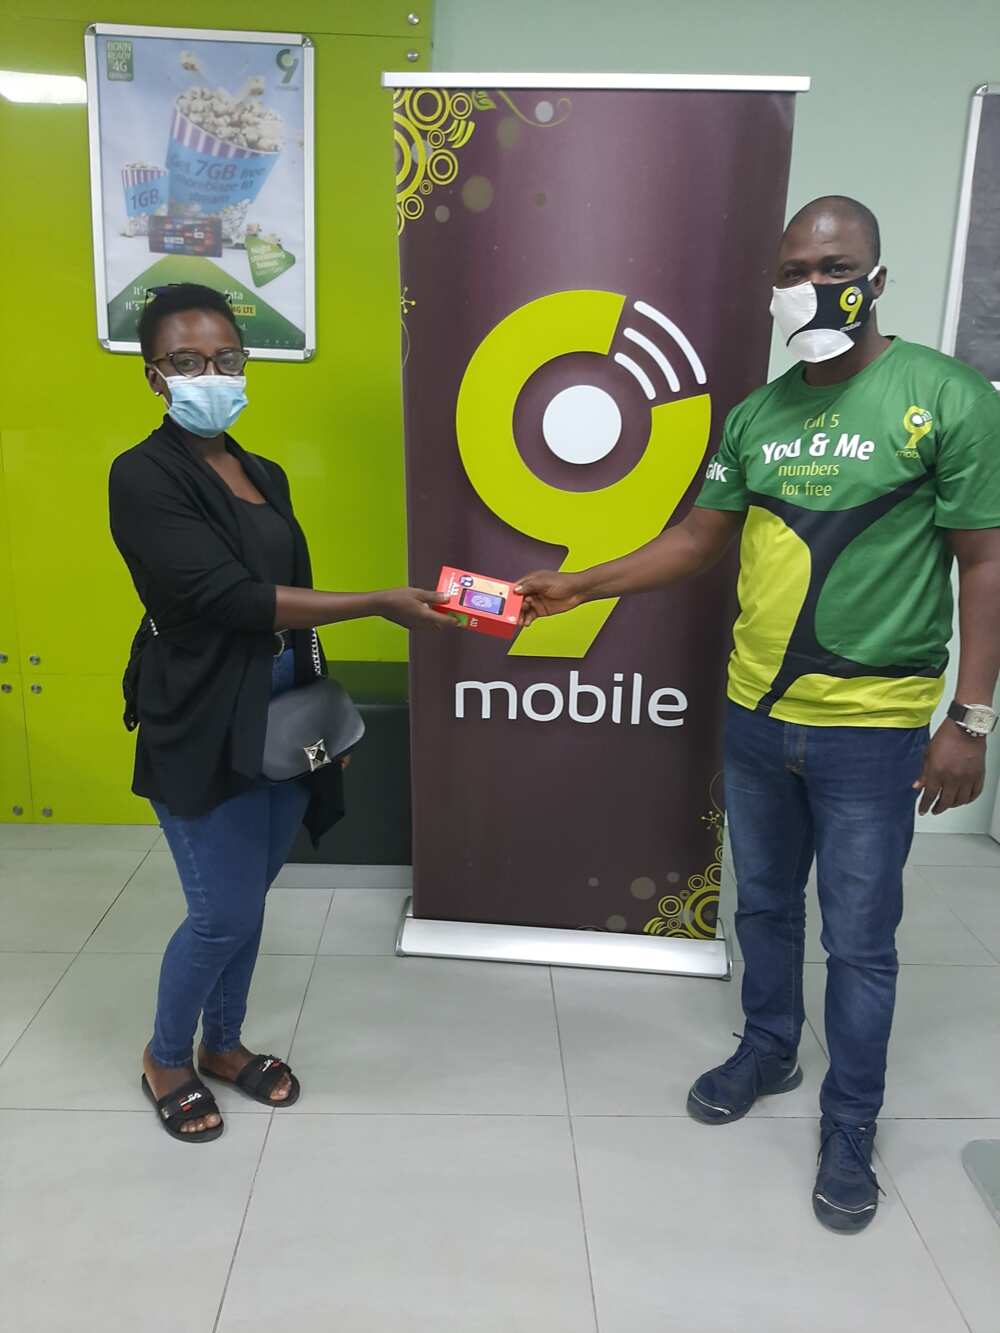 9mobile uplifts small business owners with Mega Millions Promo